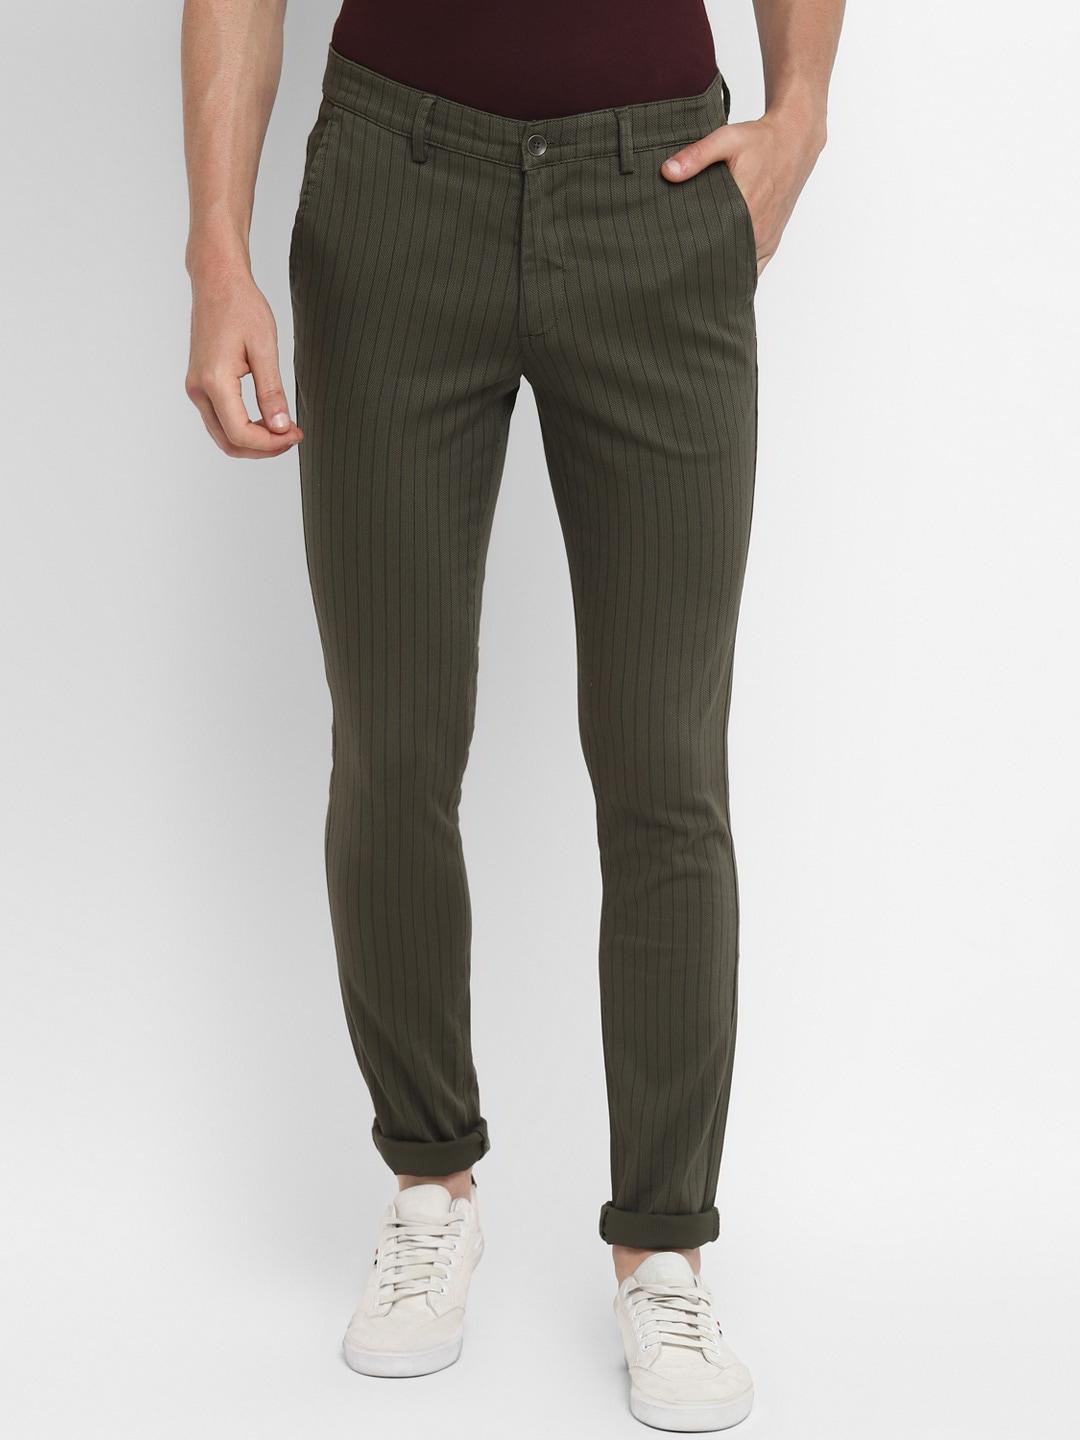 turtle-men-olive-green-striped-slim-fit-trousers